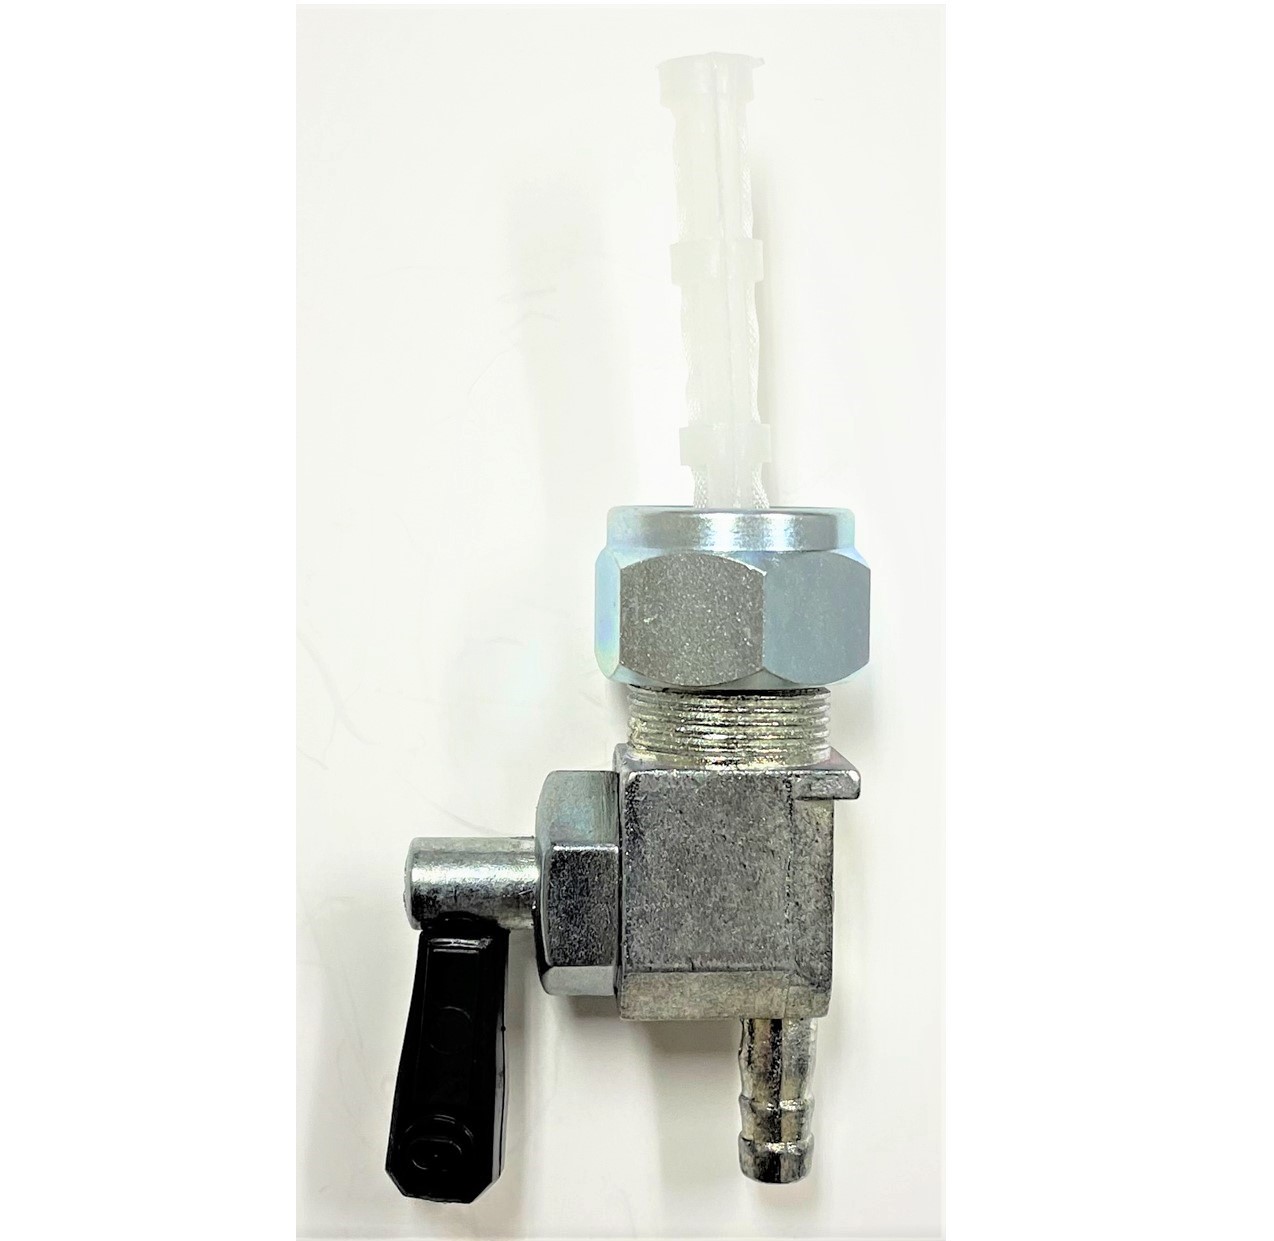 Manual Fuel Valve Fits E-Ton Yukon YXL150, CXL150, Viper RXL150R, Rover, Rover GT + Others Nut ID=15mm - Click Image to Close